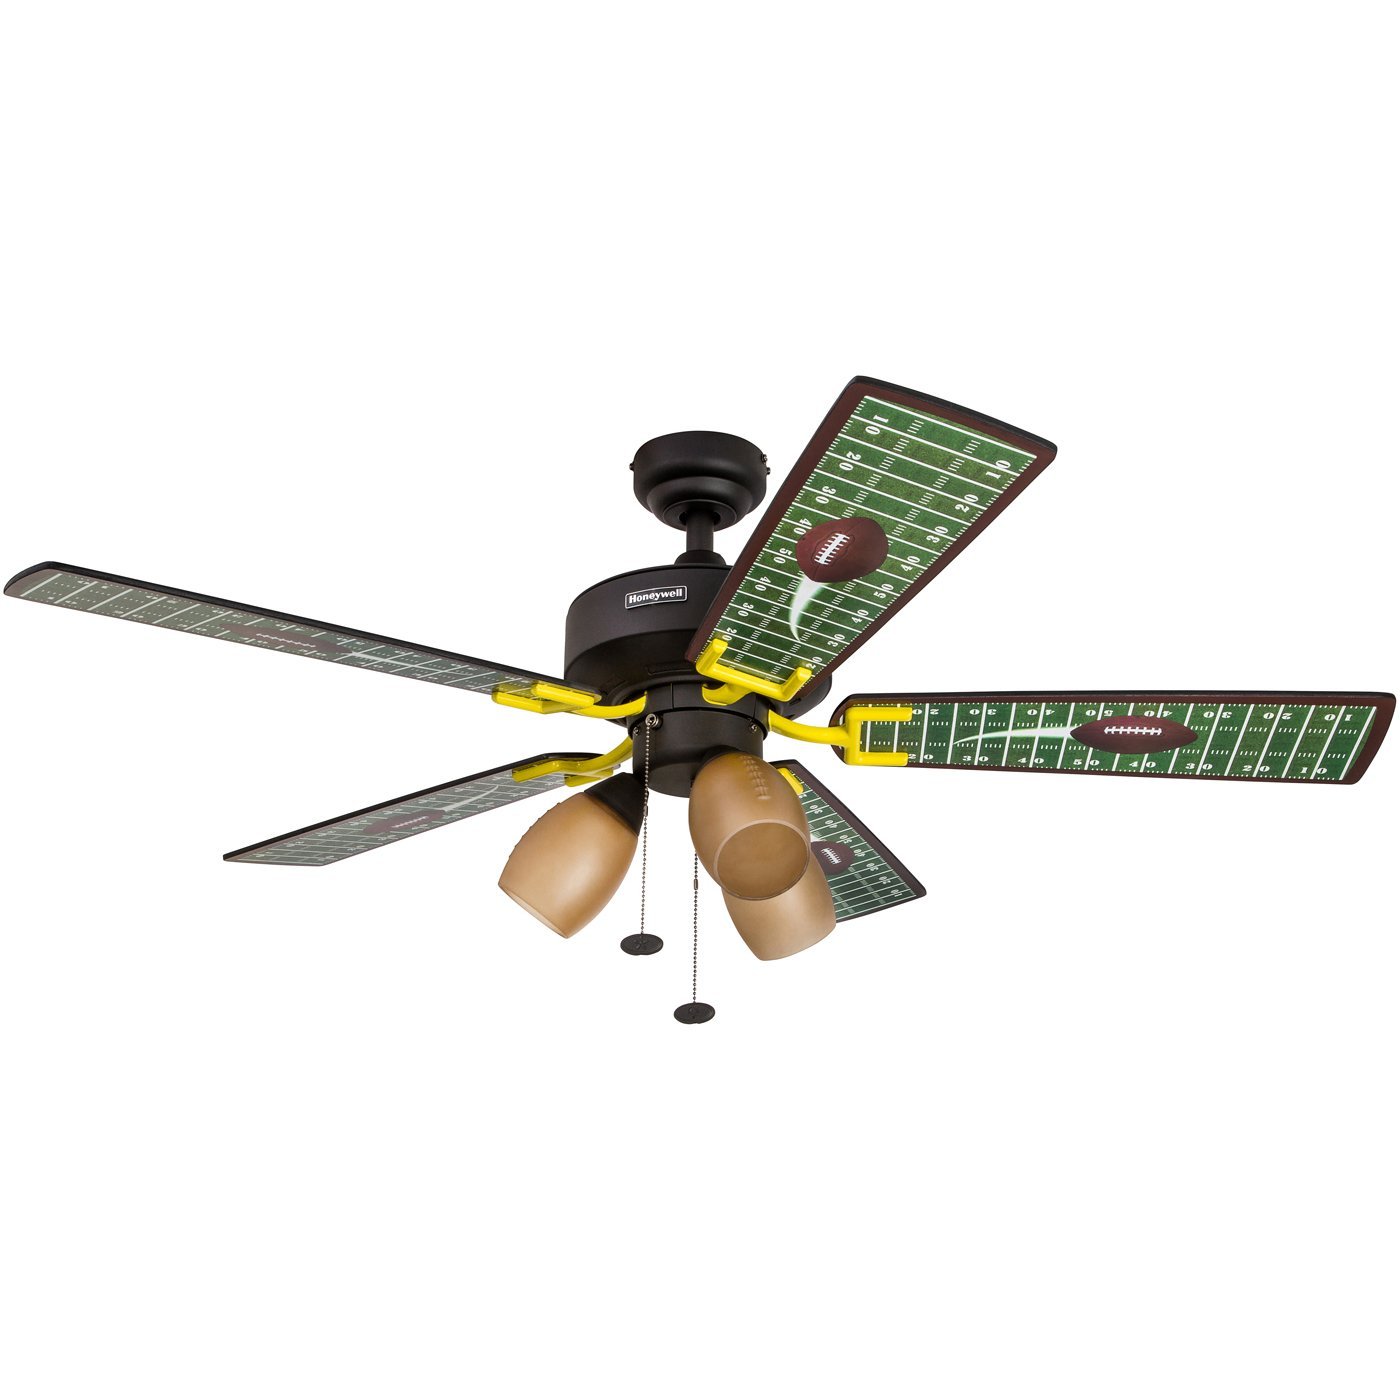 Honeywell Touchdown 48-Inch Football Ceiling Fan with Amber Shade Lights, Five Football Themed Blades, Matte Black